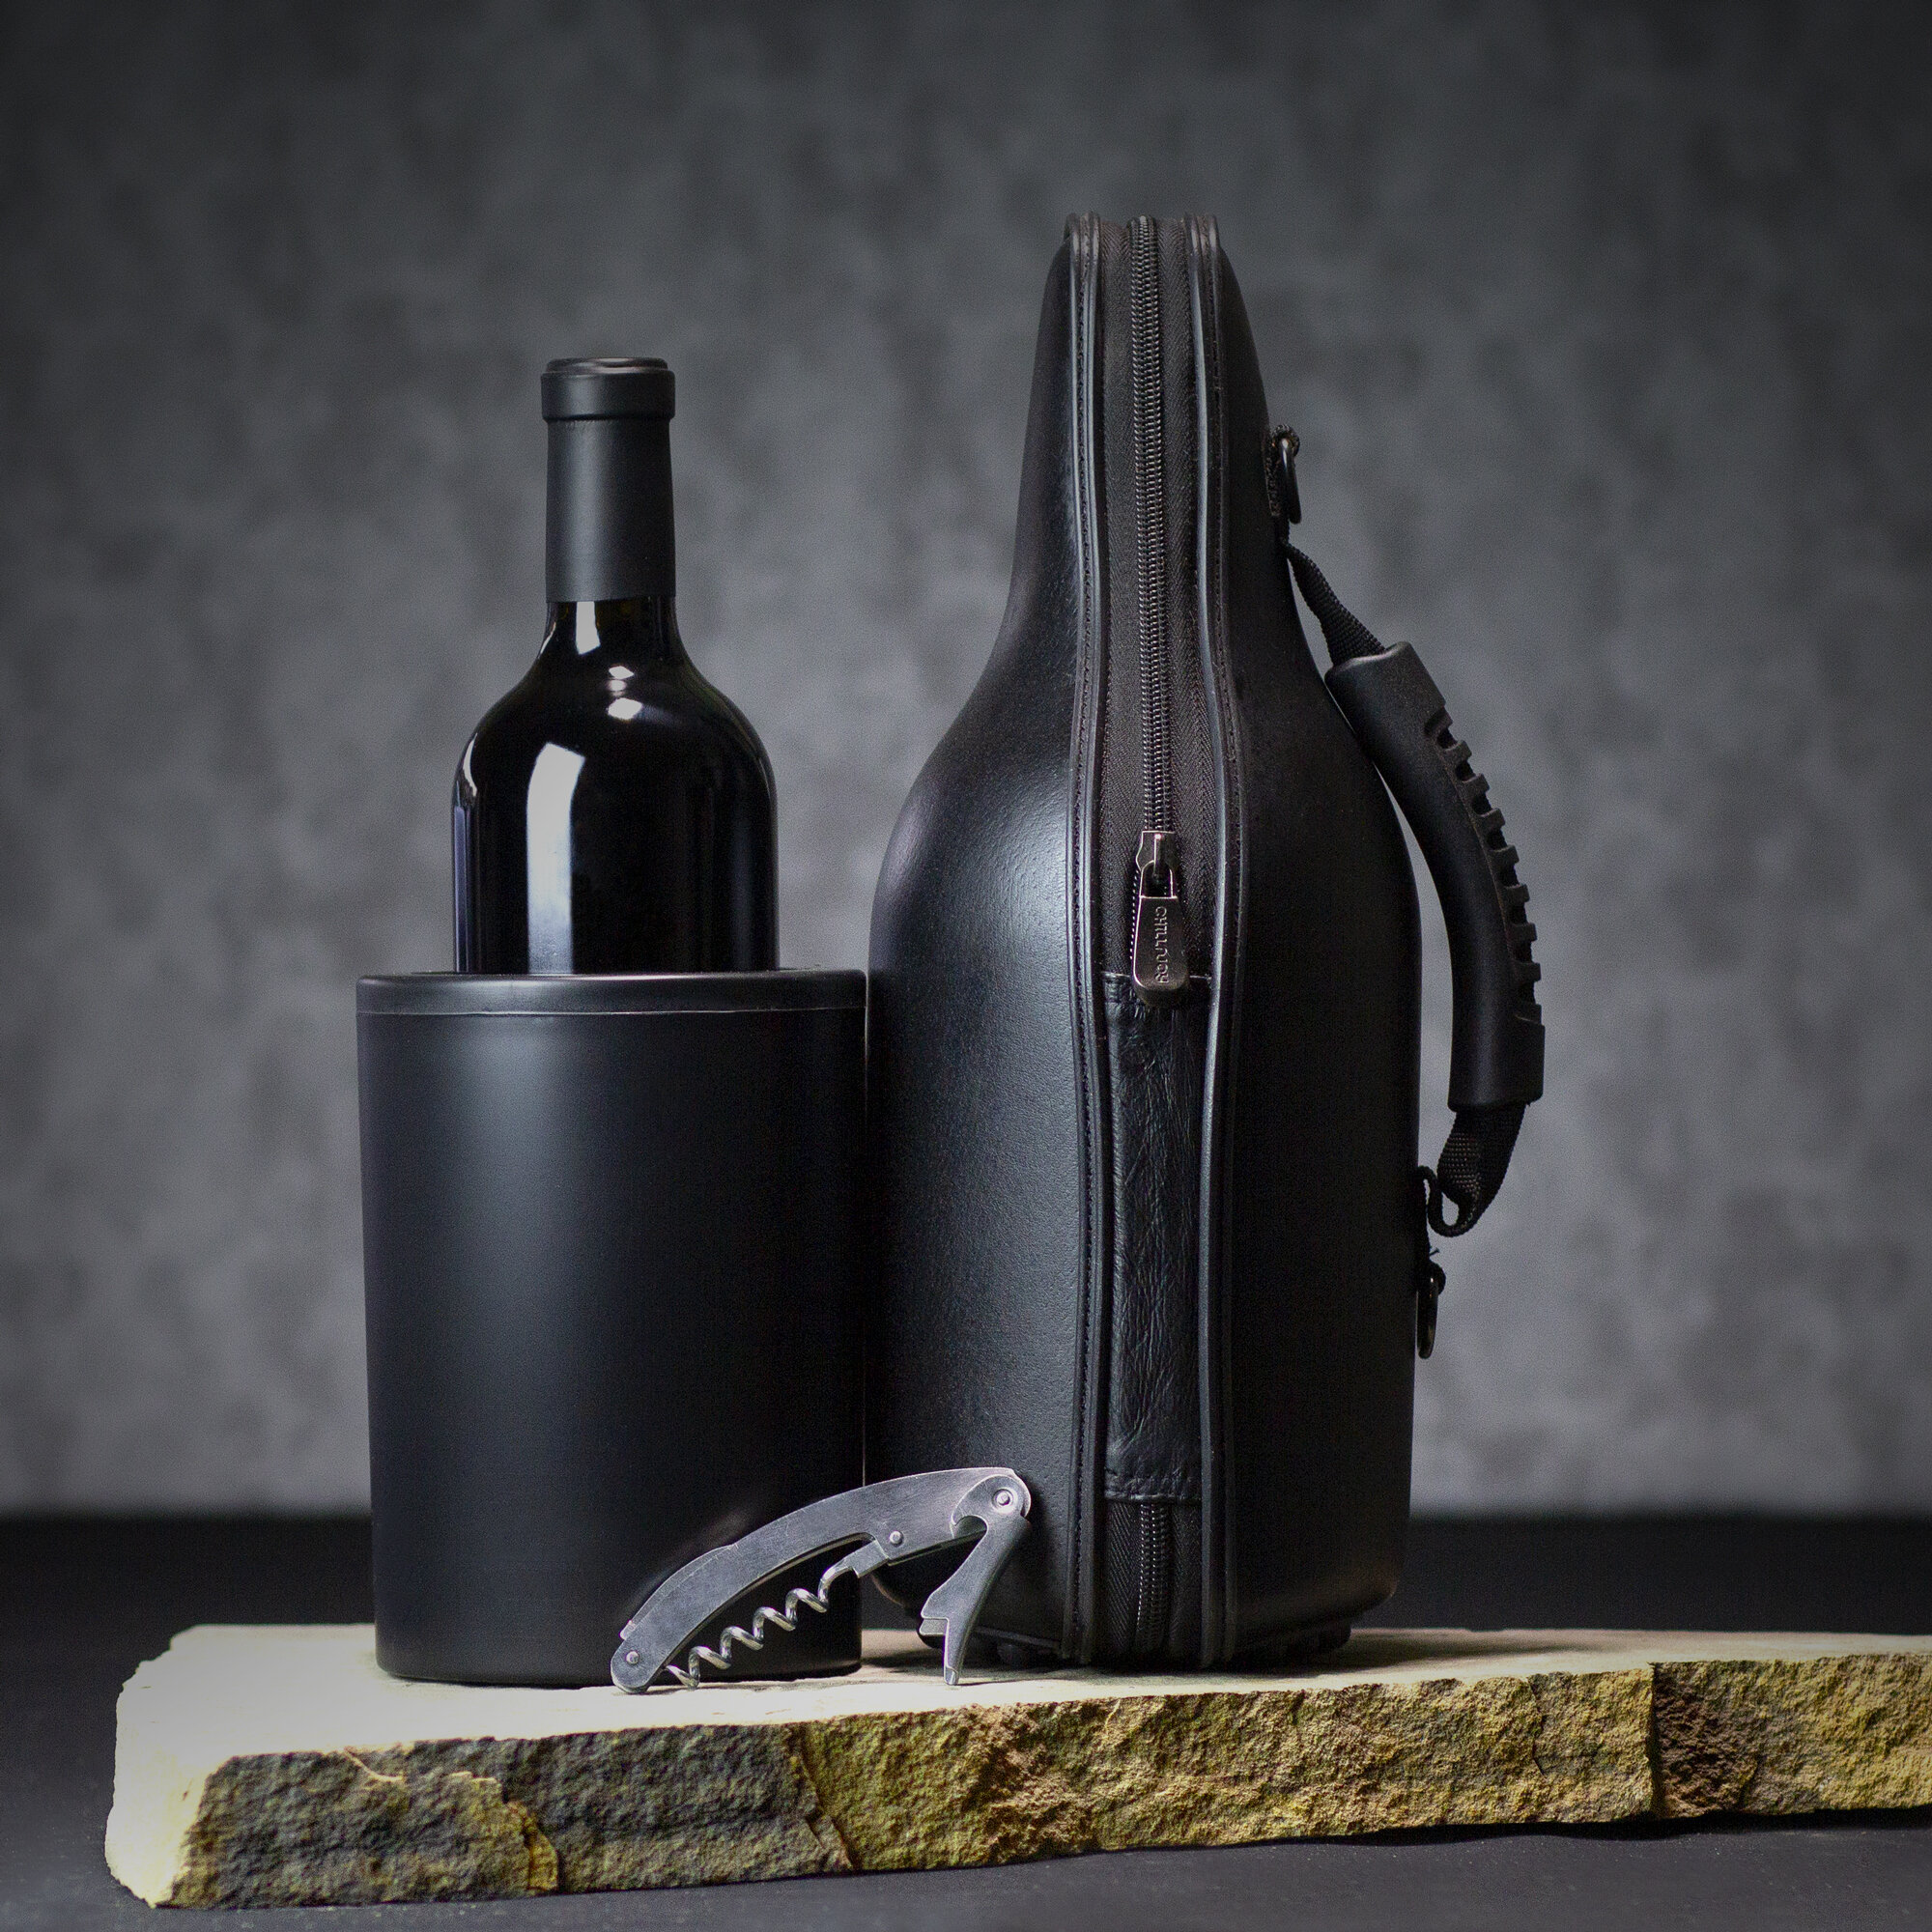 CaddyO – Leather Wine Tote & Iceless Wine Chiller Set by ChillnJoy